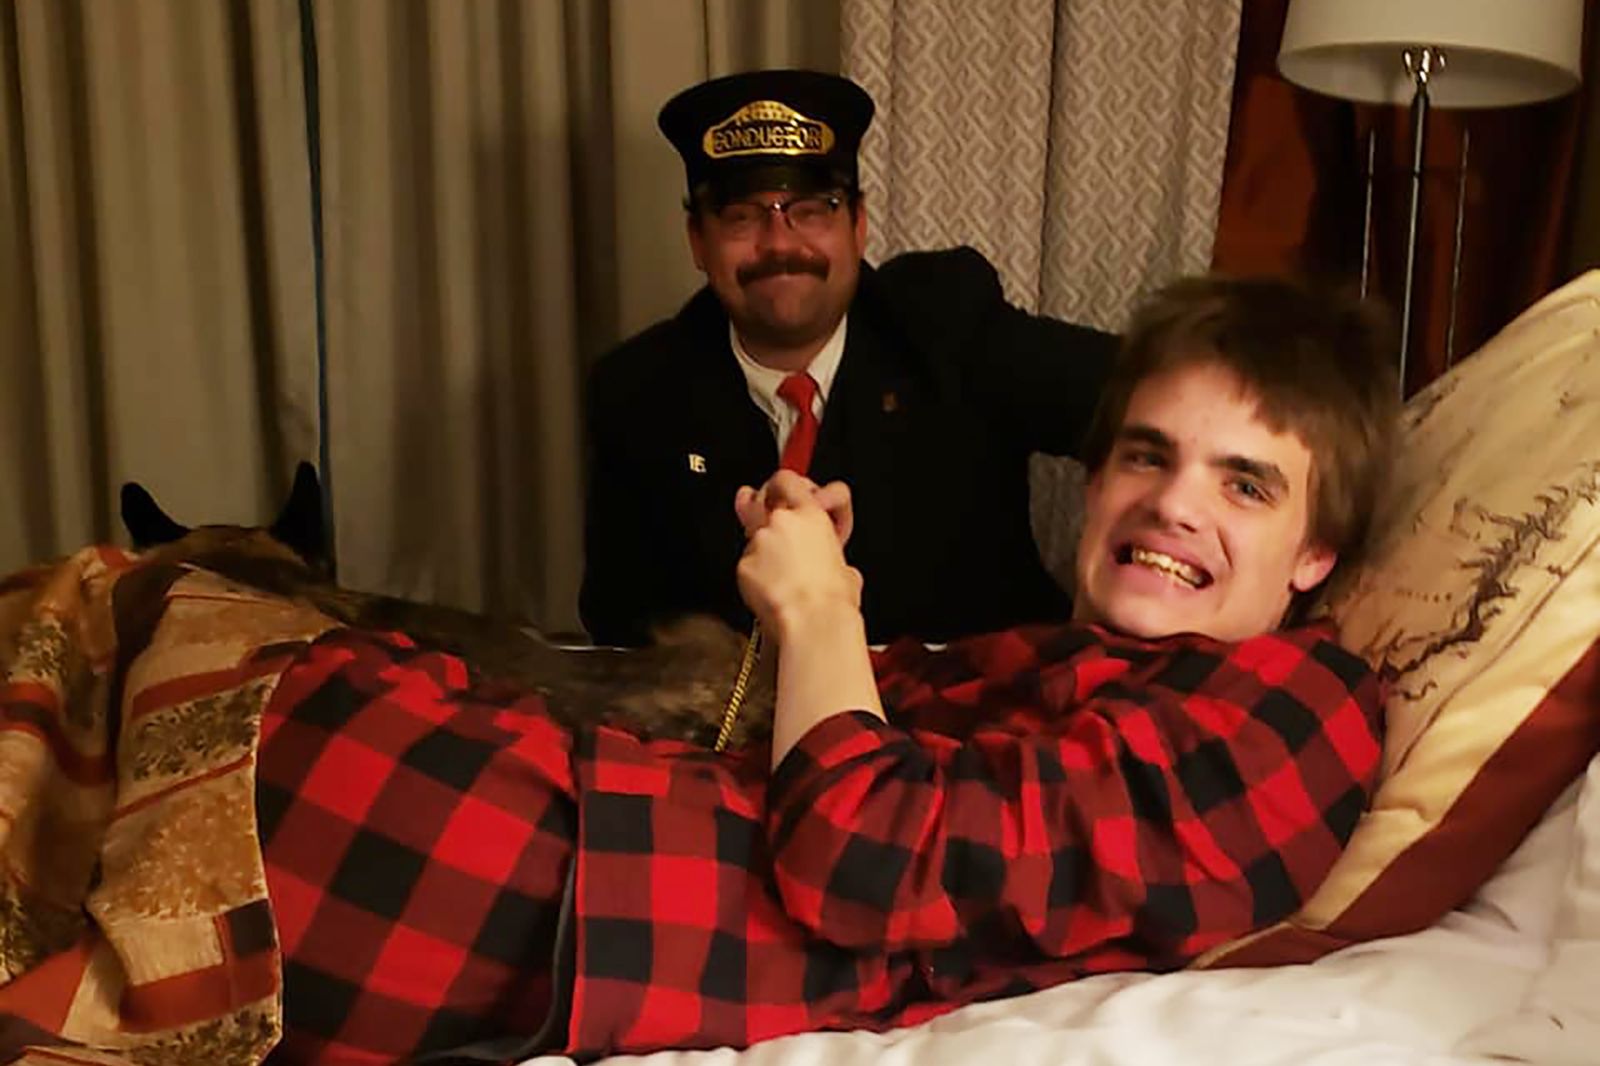 A teen with autism had a magical 'Polar Express' experience, even though he  was too excited to ride the train | CNN